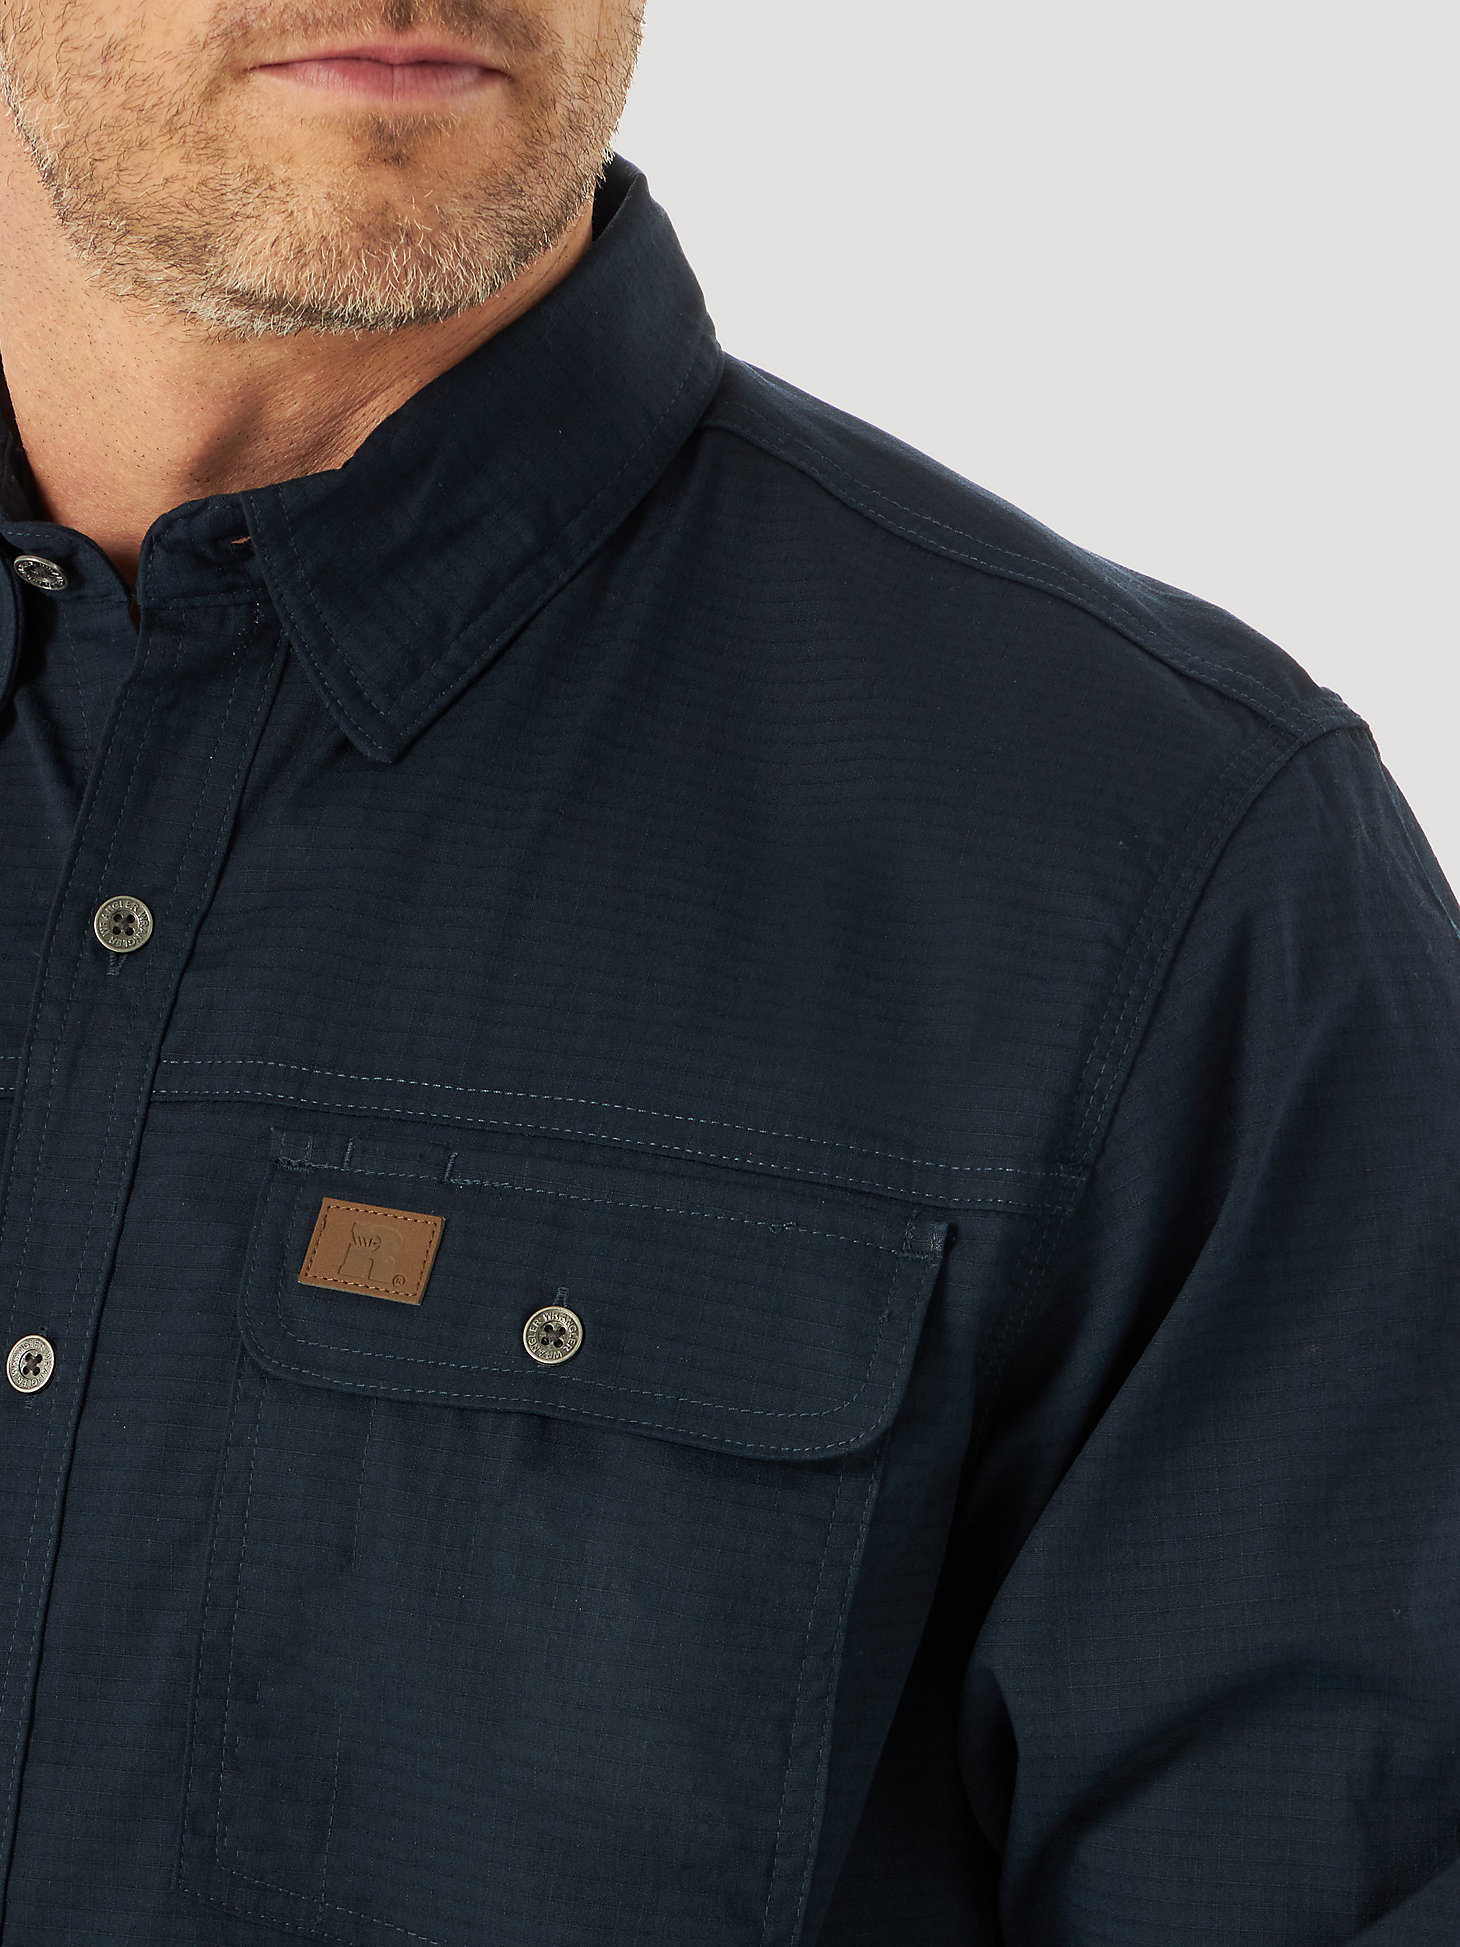 Wrangler® RIGGS Workwear® Long Sleeve Vented Solid Work Shirt in Navy alternative view 2